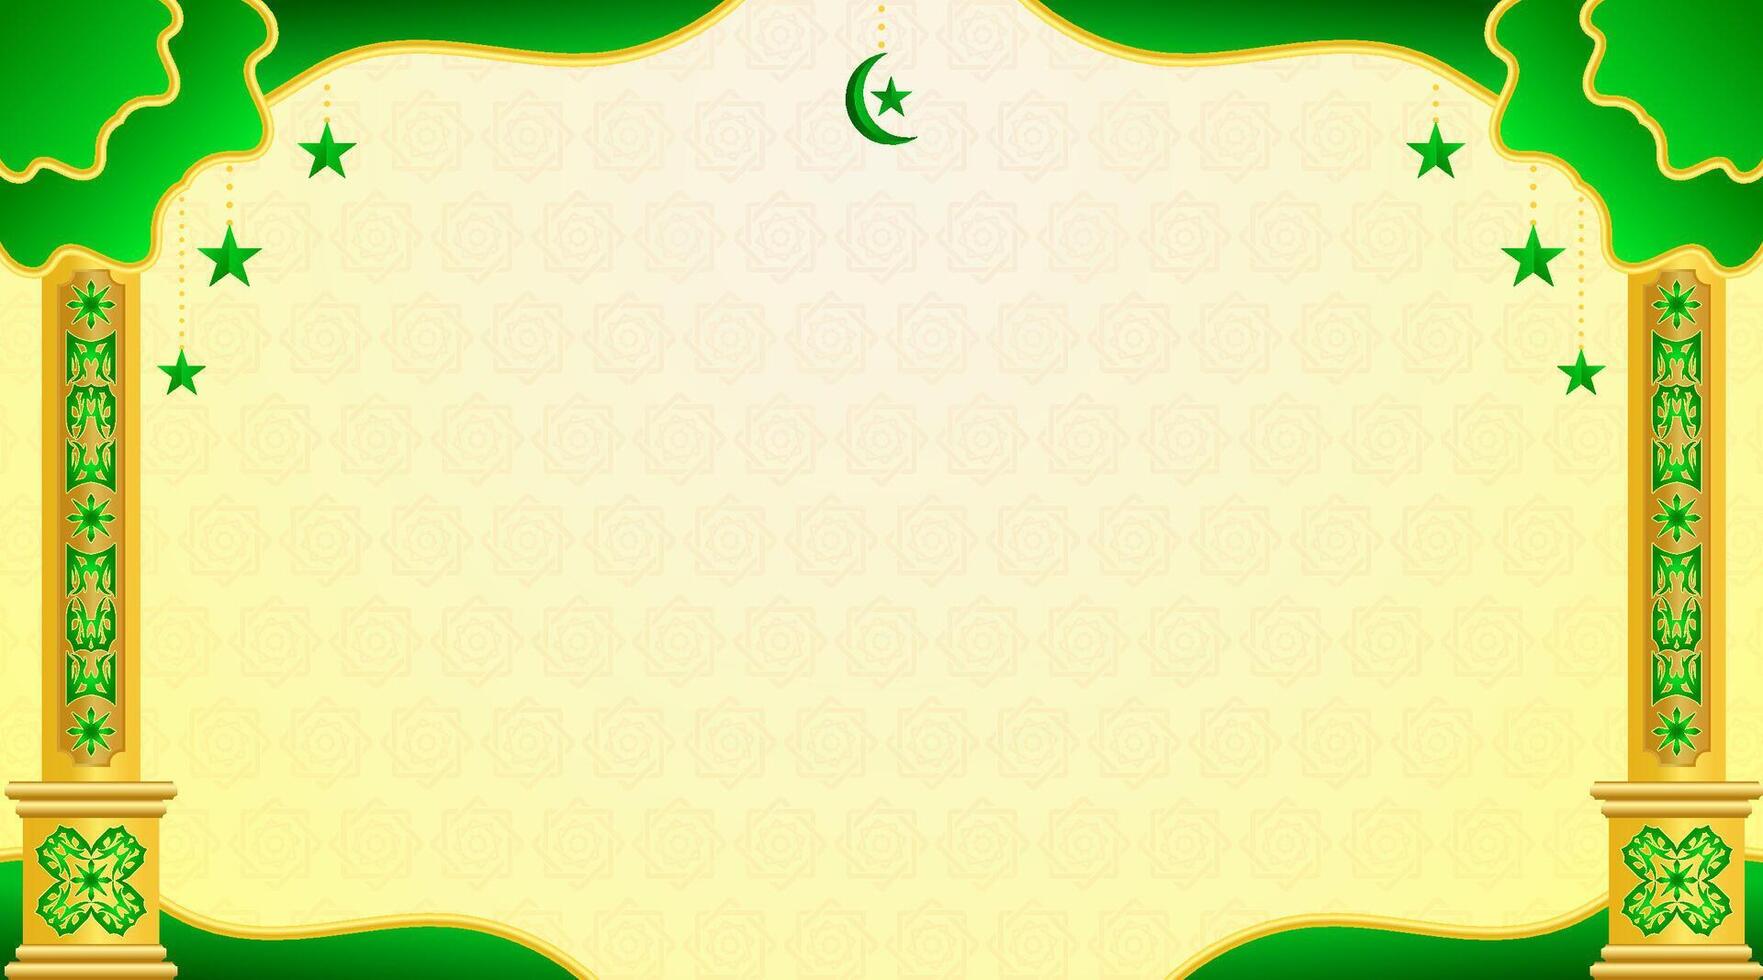 Islamic banner with green ornaments vector